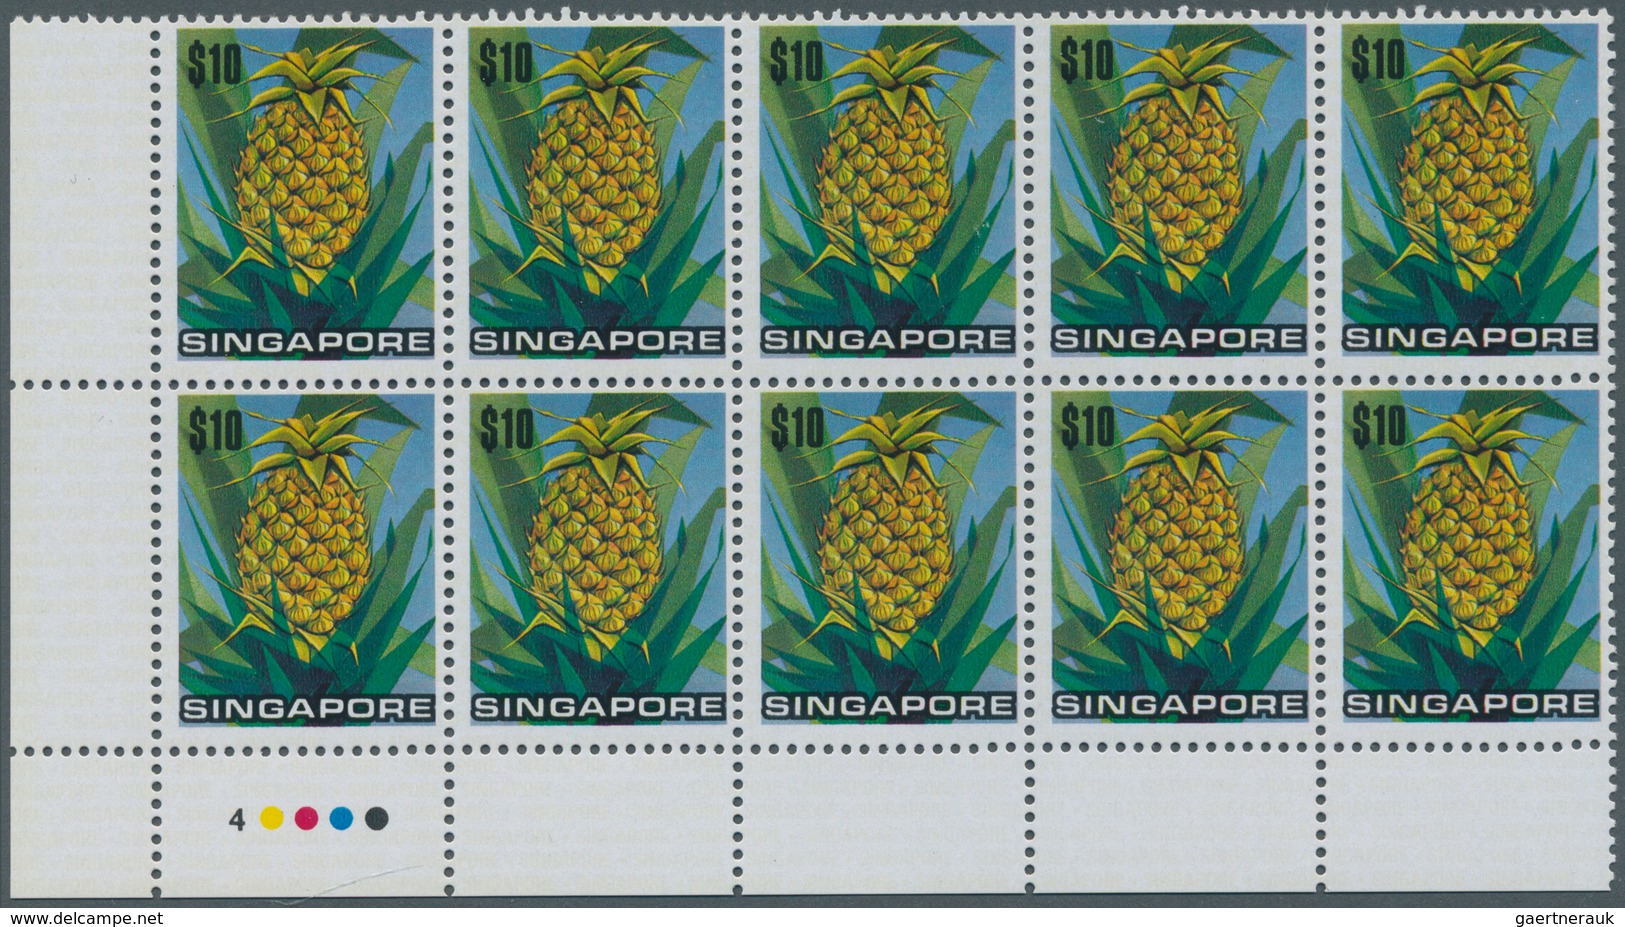 Thematik: Nahrung-Obst / Food-fruits: 1973, Fruits Defintives Issue $10 ‚pineapple‘ (key Value Of Th - Ernährung